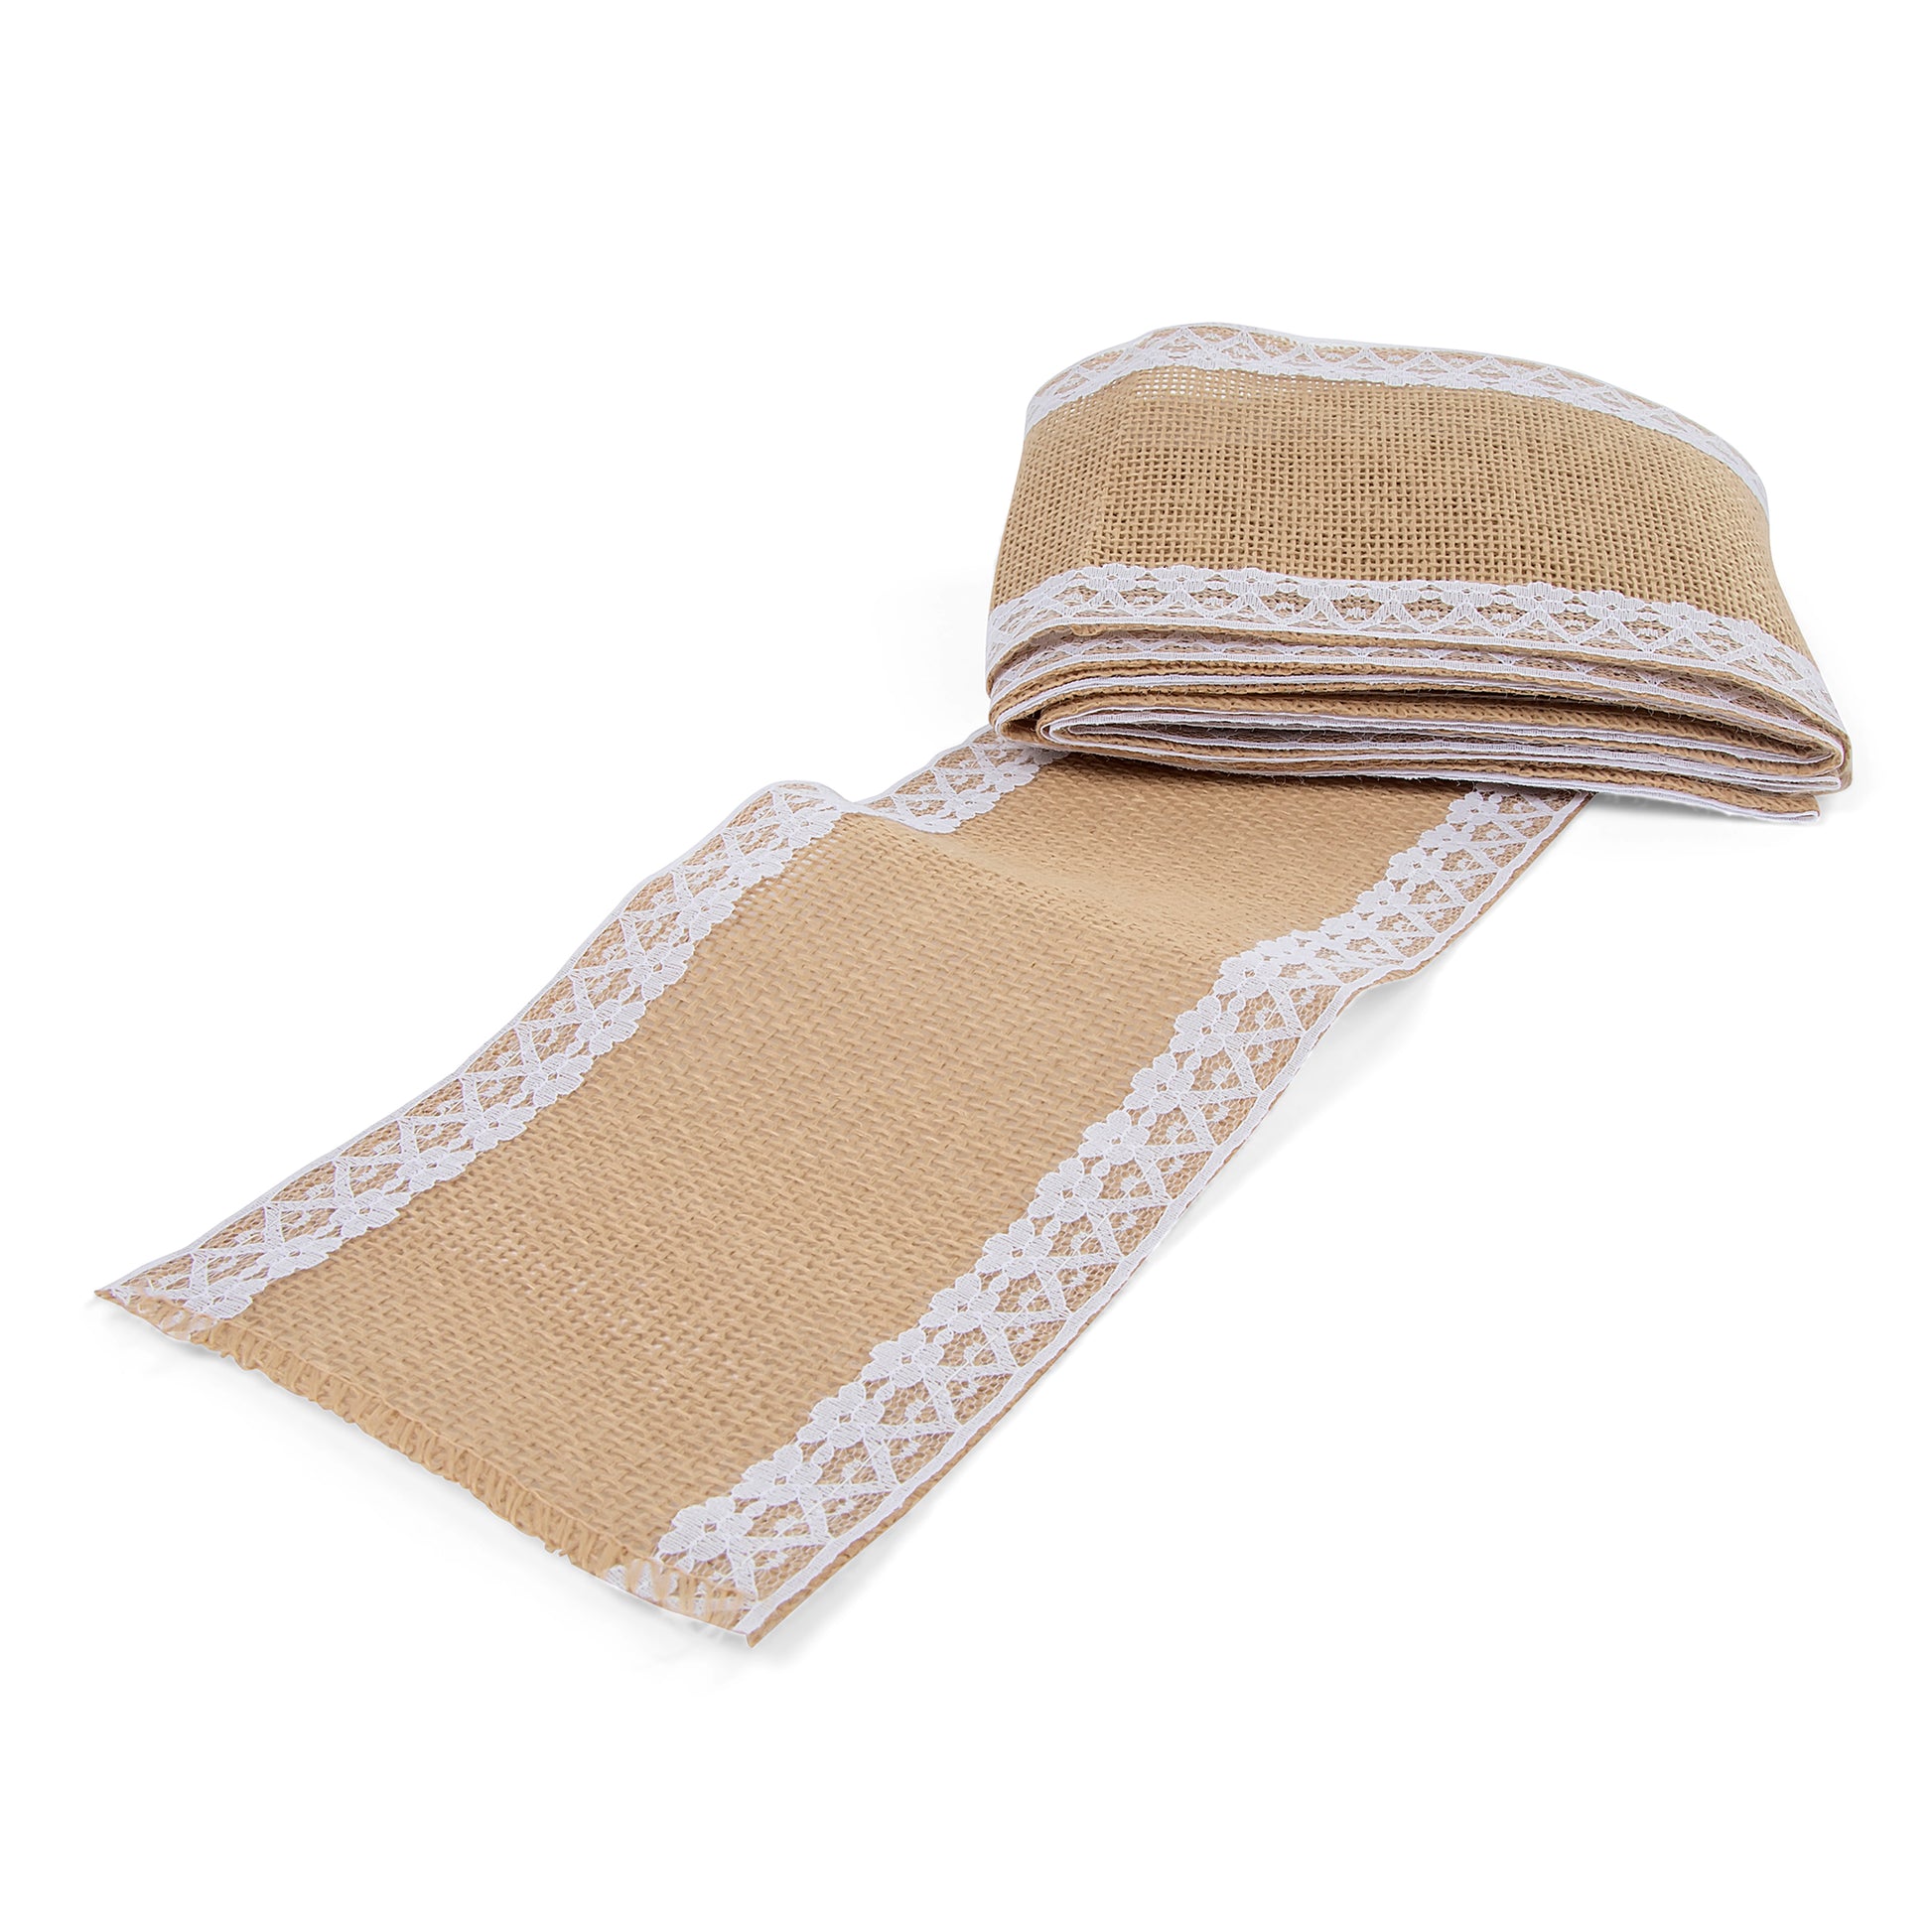 Natural Jute Burlap Fabric Roll for Bouquet Wrapping